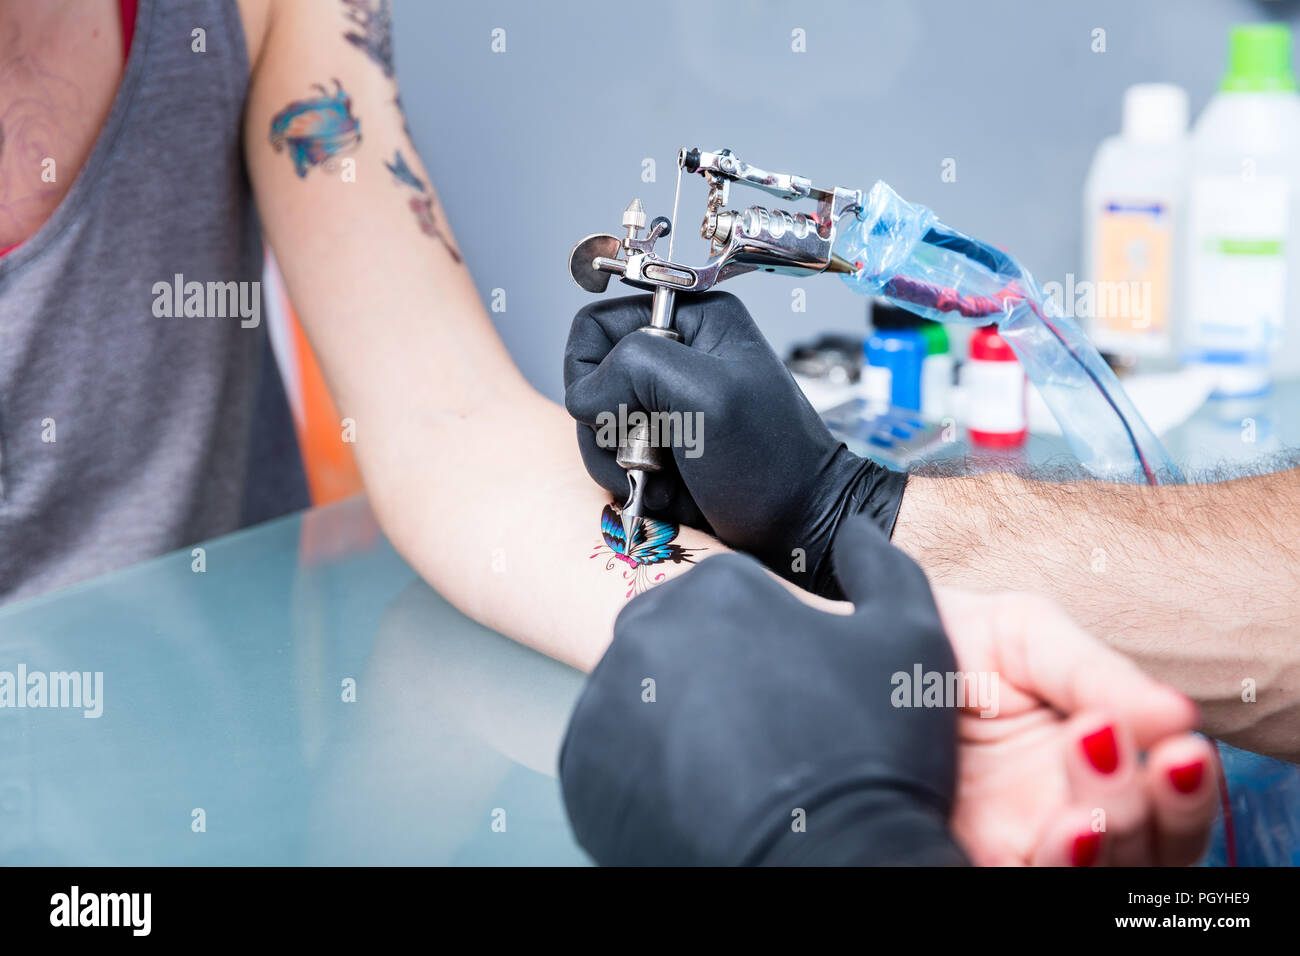 Close-up of the hands of a skilled tattoo artist wearing black gloves while setting a sterile machine for tattooing in a modern studio Stock Photo